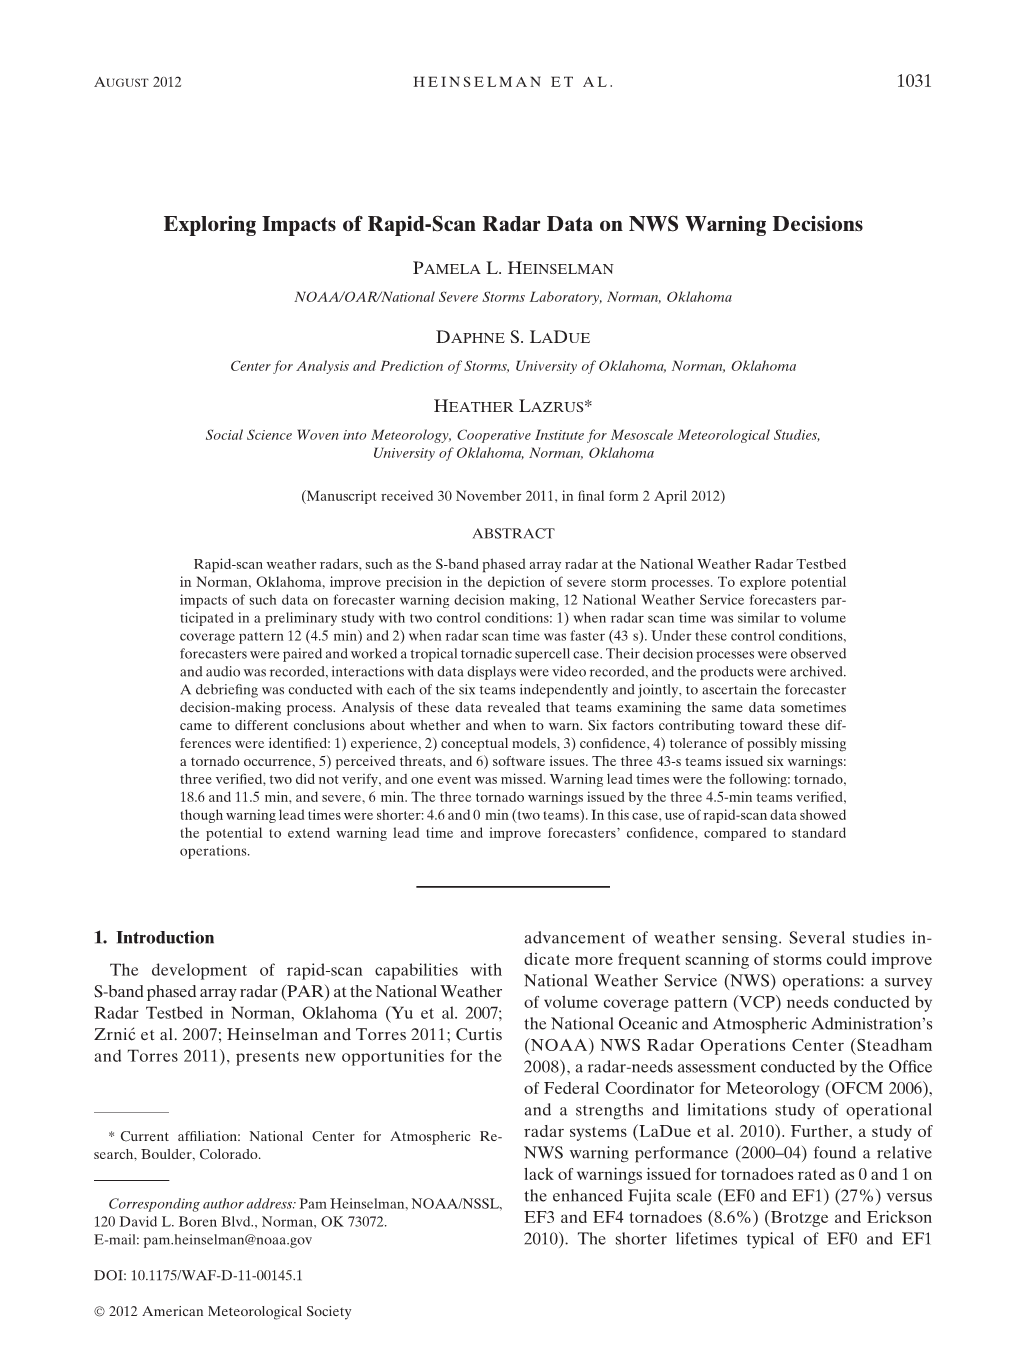 Exploring Impacts of Rapid-Scan Radar Data on NWS Warning Decisions